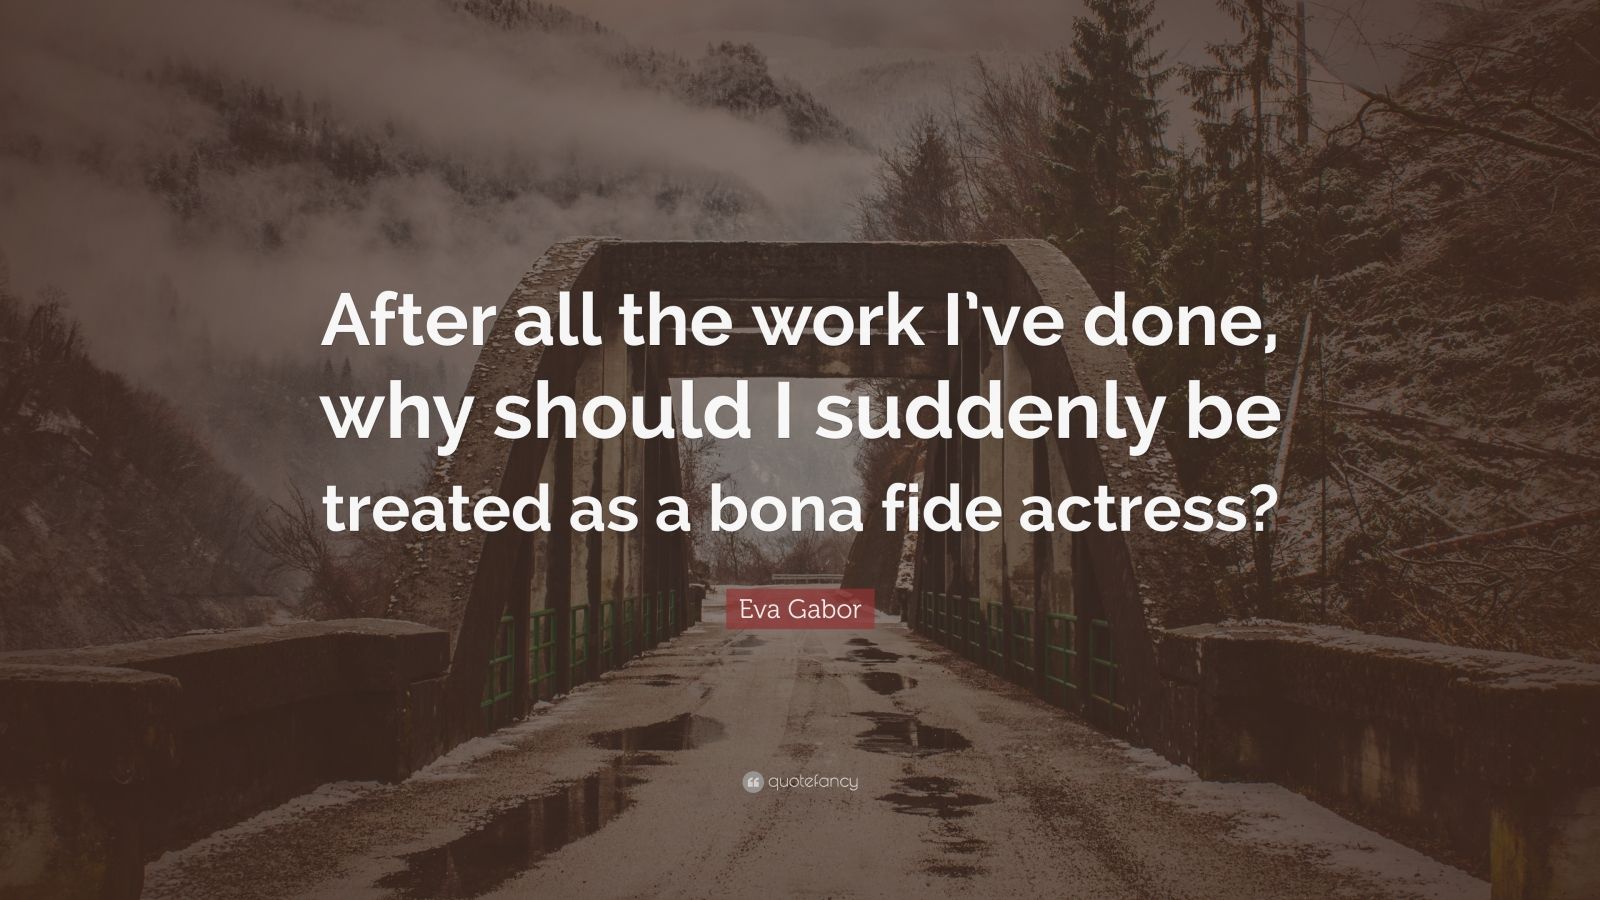 Eva Gabor Quote: "After all the work I've done, why should I suddenly be treated as a bona fide ...